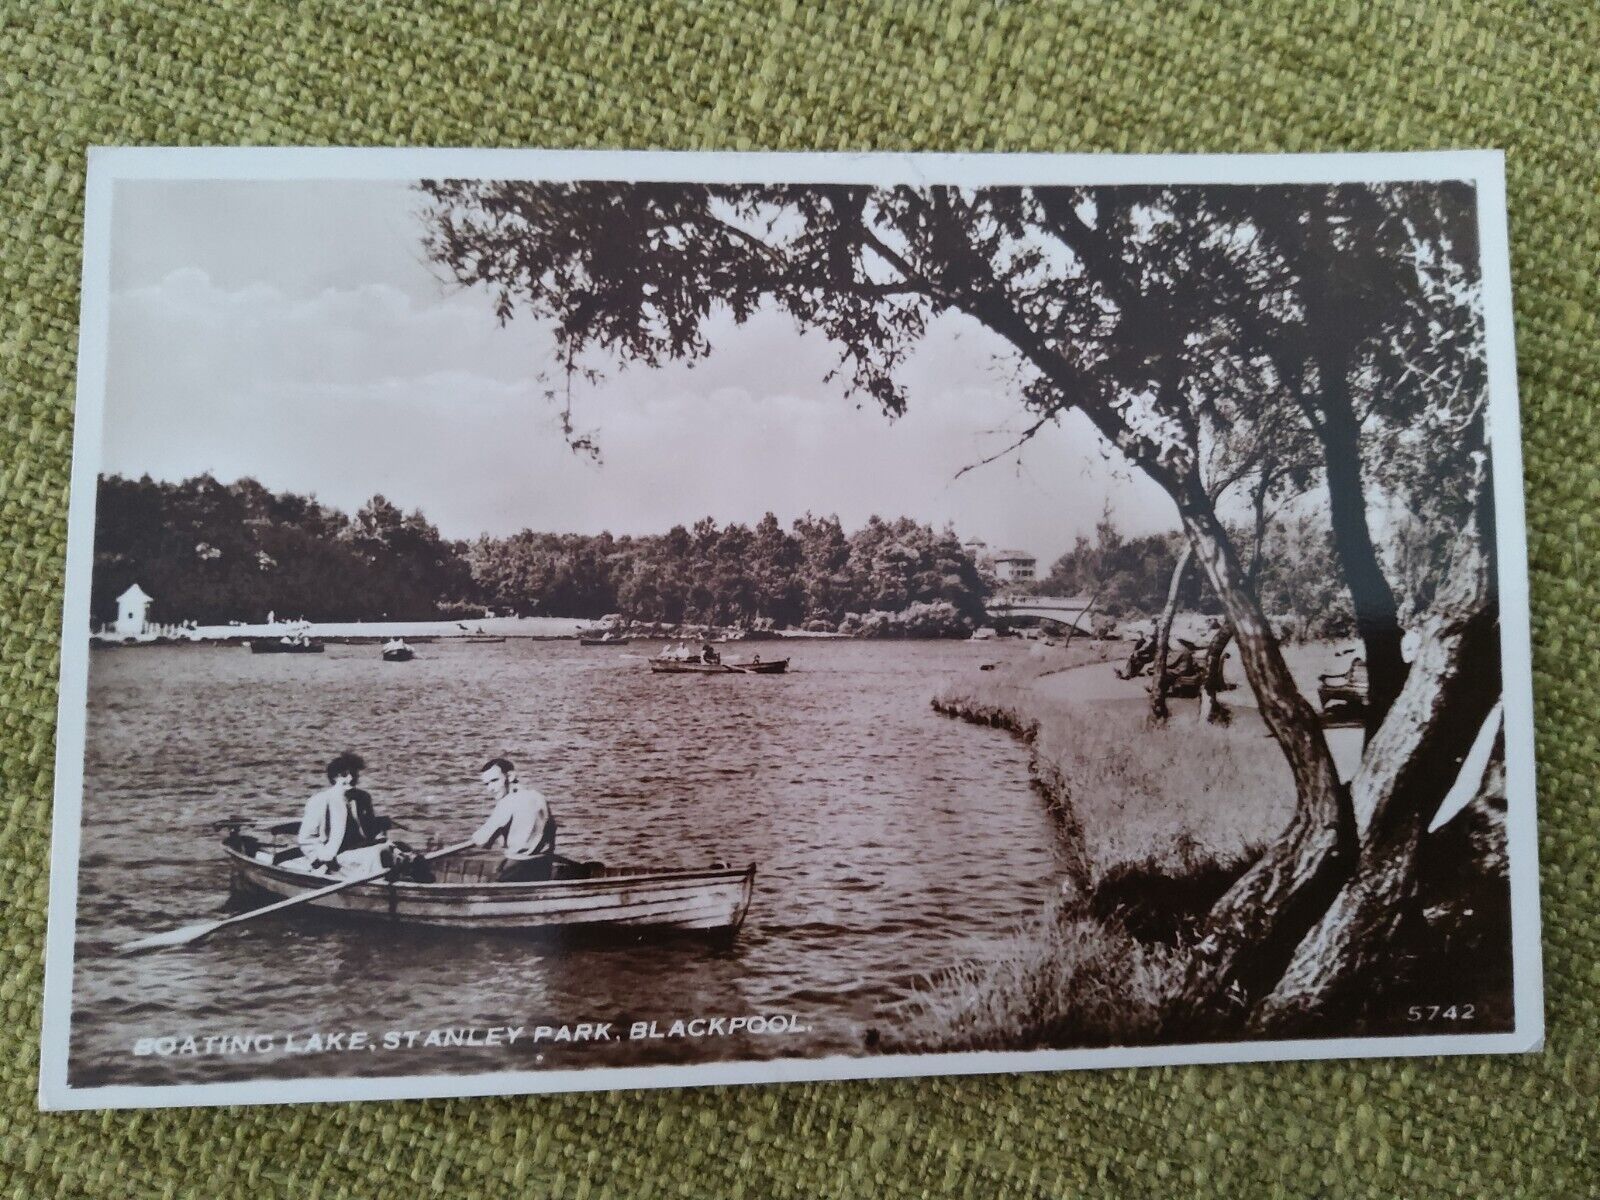 House Clearance - Old 1965 Boating Lake, Stanley Park,Blackpool PC. Couple Rowing. Real Photo 